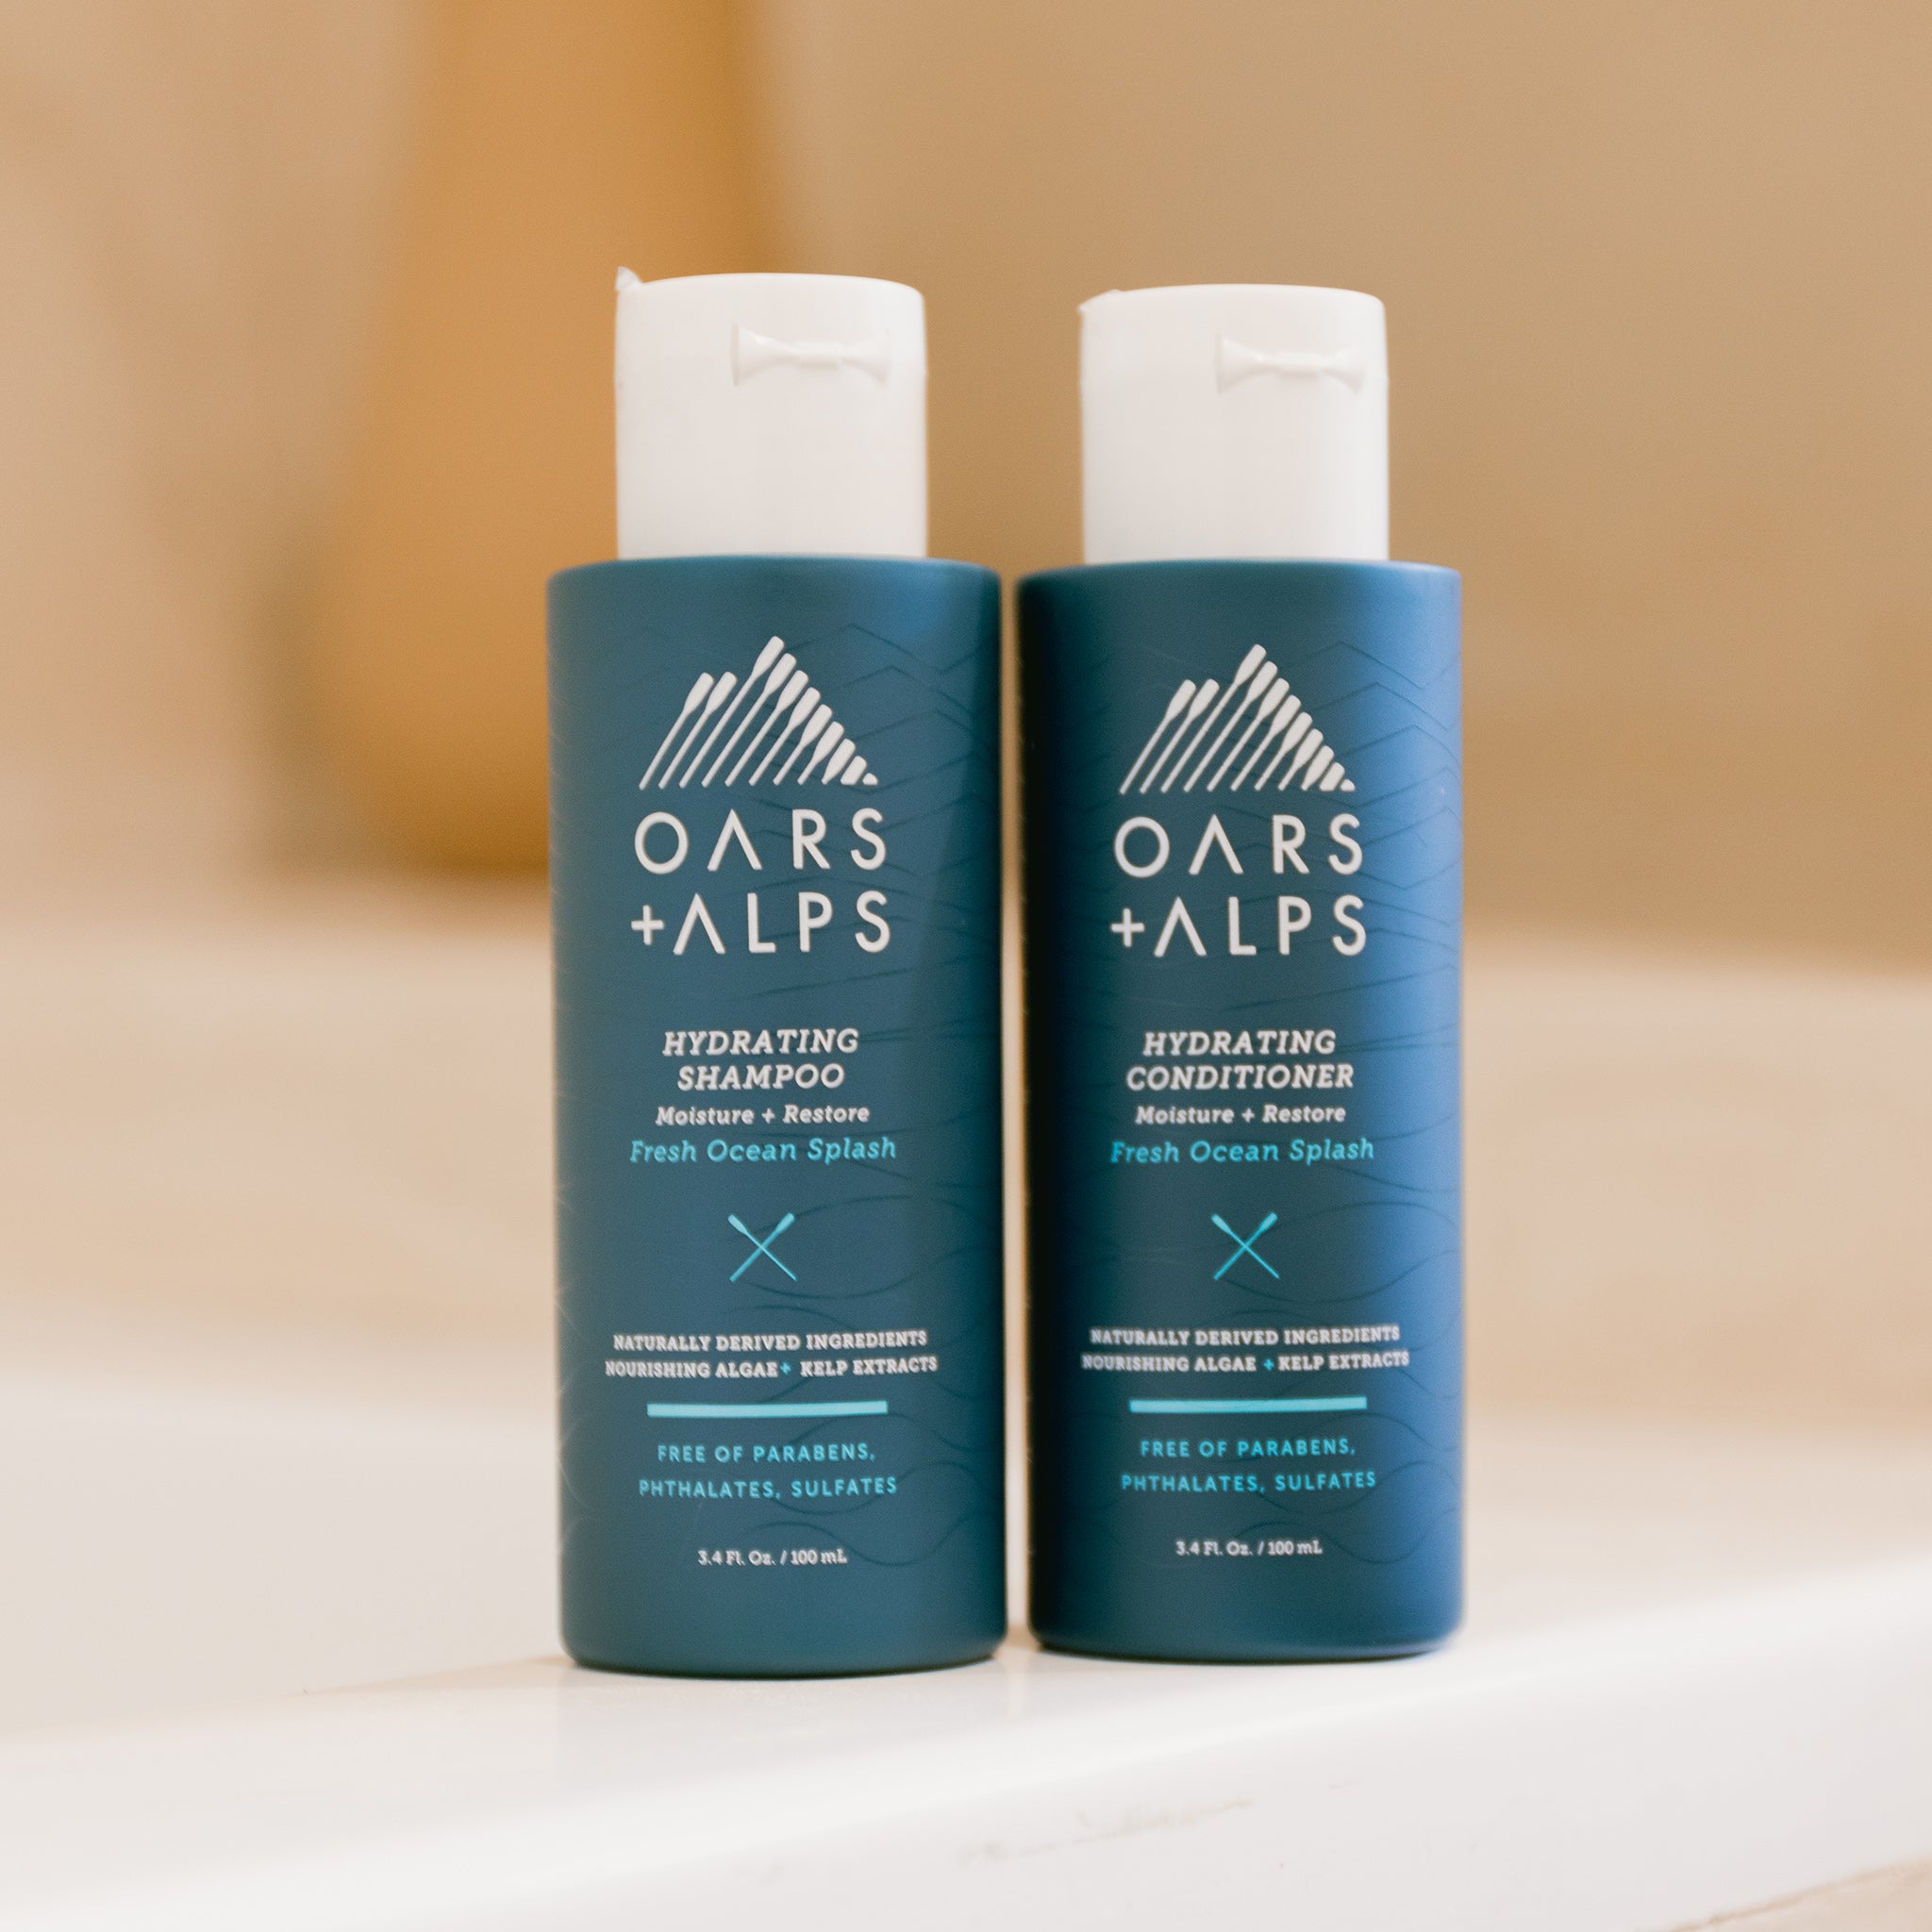 Travel Size Hydrating Conditioner Duo